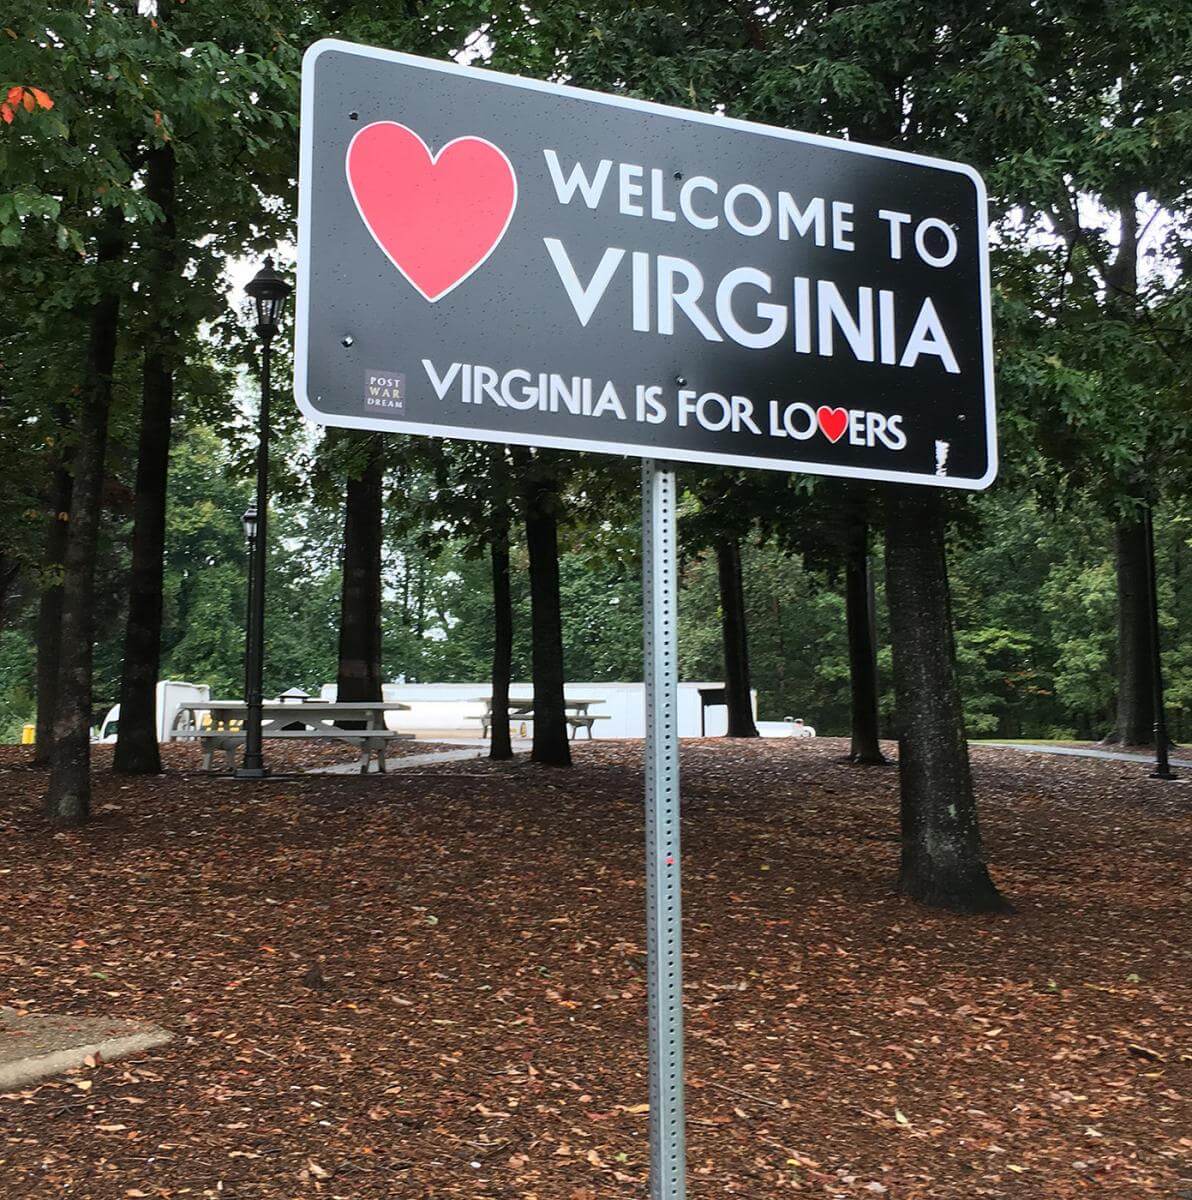 Welcome to Virginia: Virginia is for Lovers. Road sign near rest stop, Fredericksburg, Virginia, September 2016. Photograph by Eric Solomon. Courtesy of Eric Solomon.